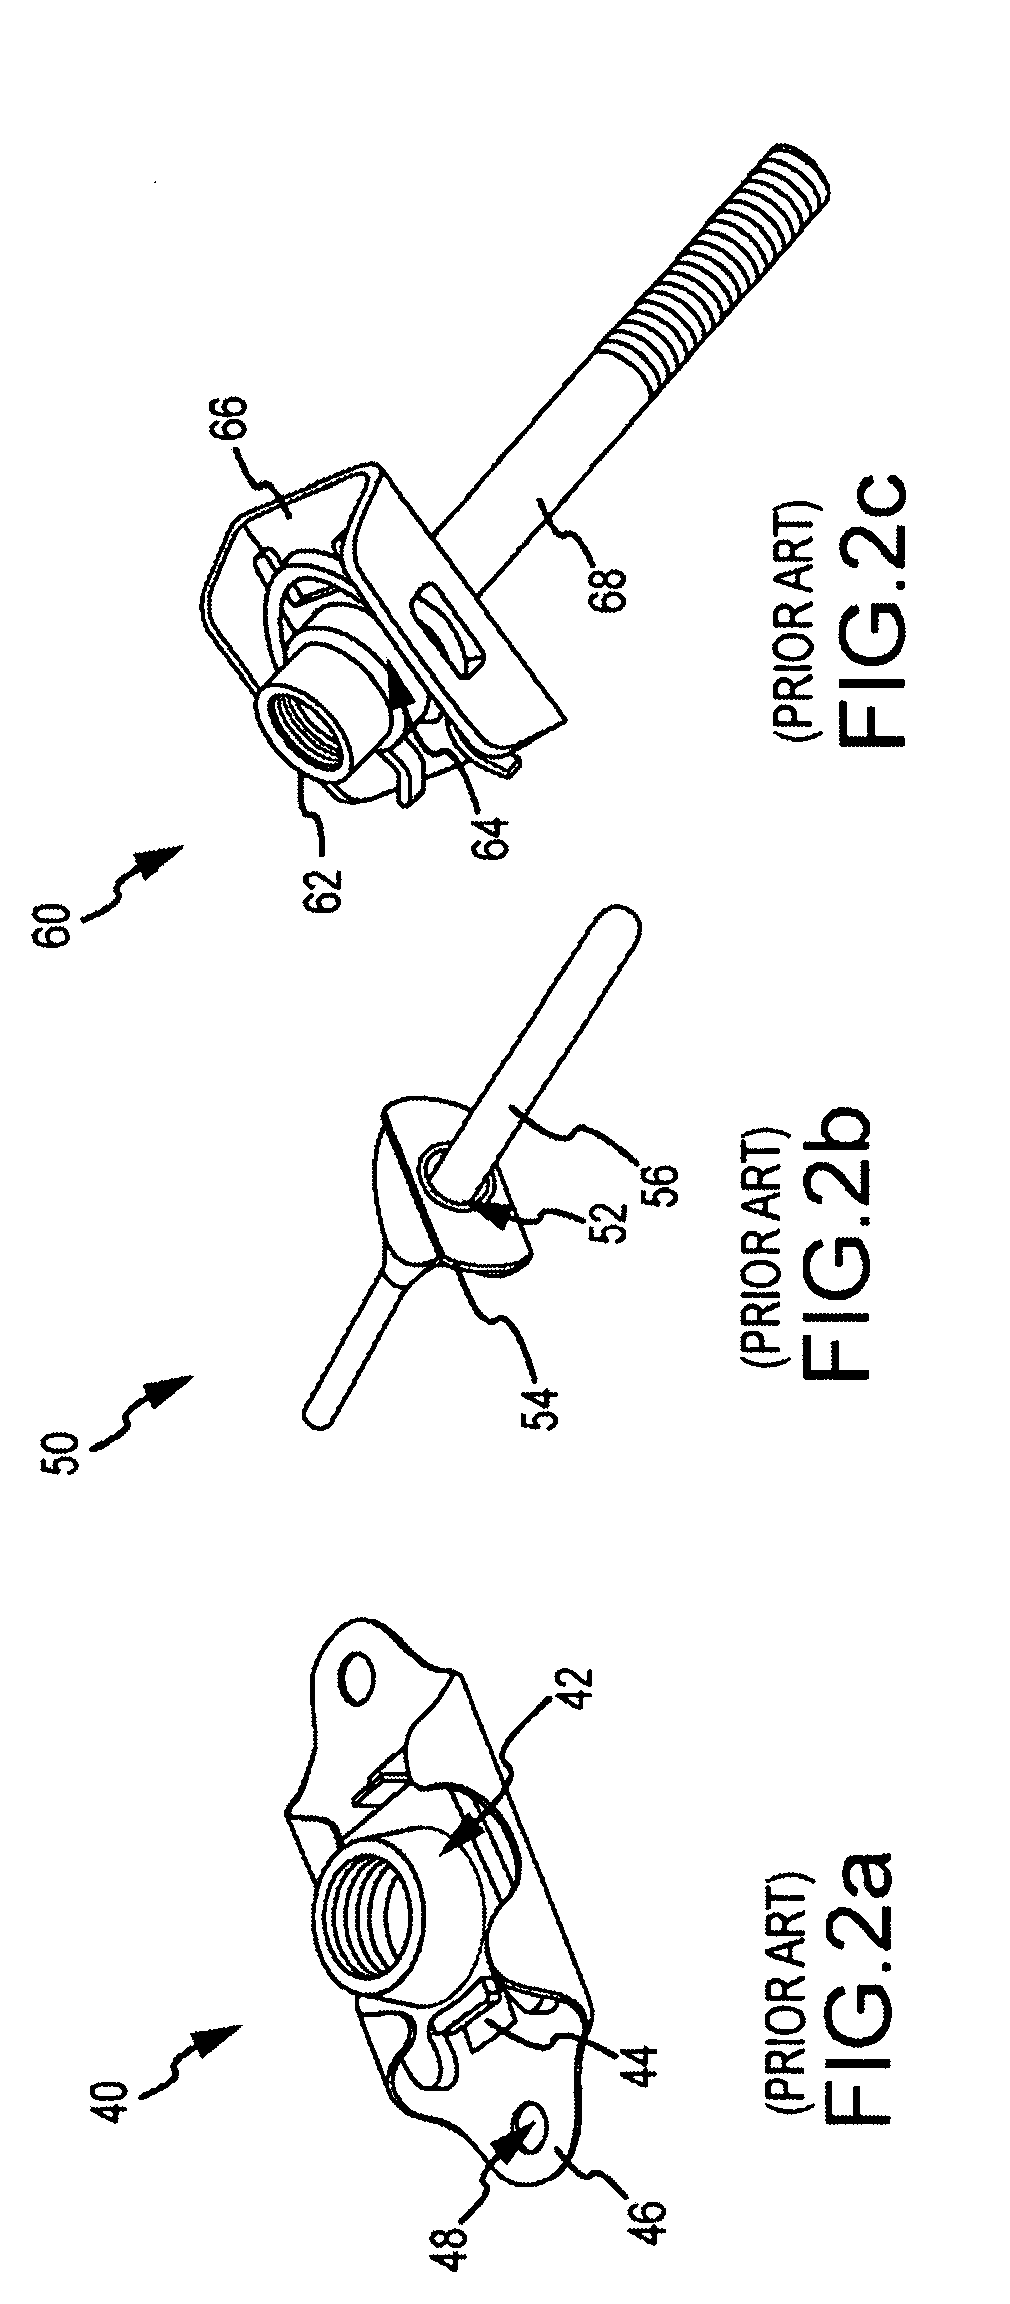 Integrated nutplate and clip for a floating fastener and method of manufacture and assembly